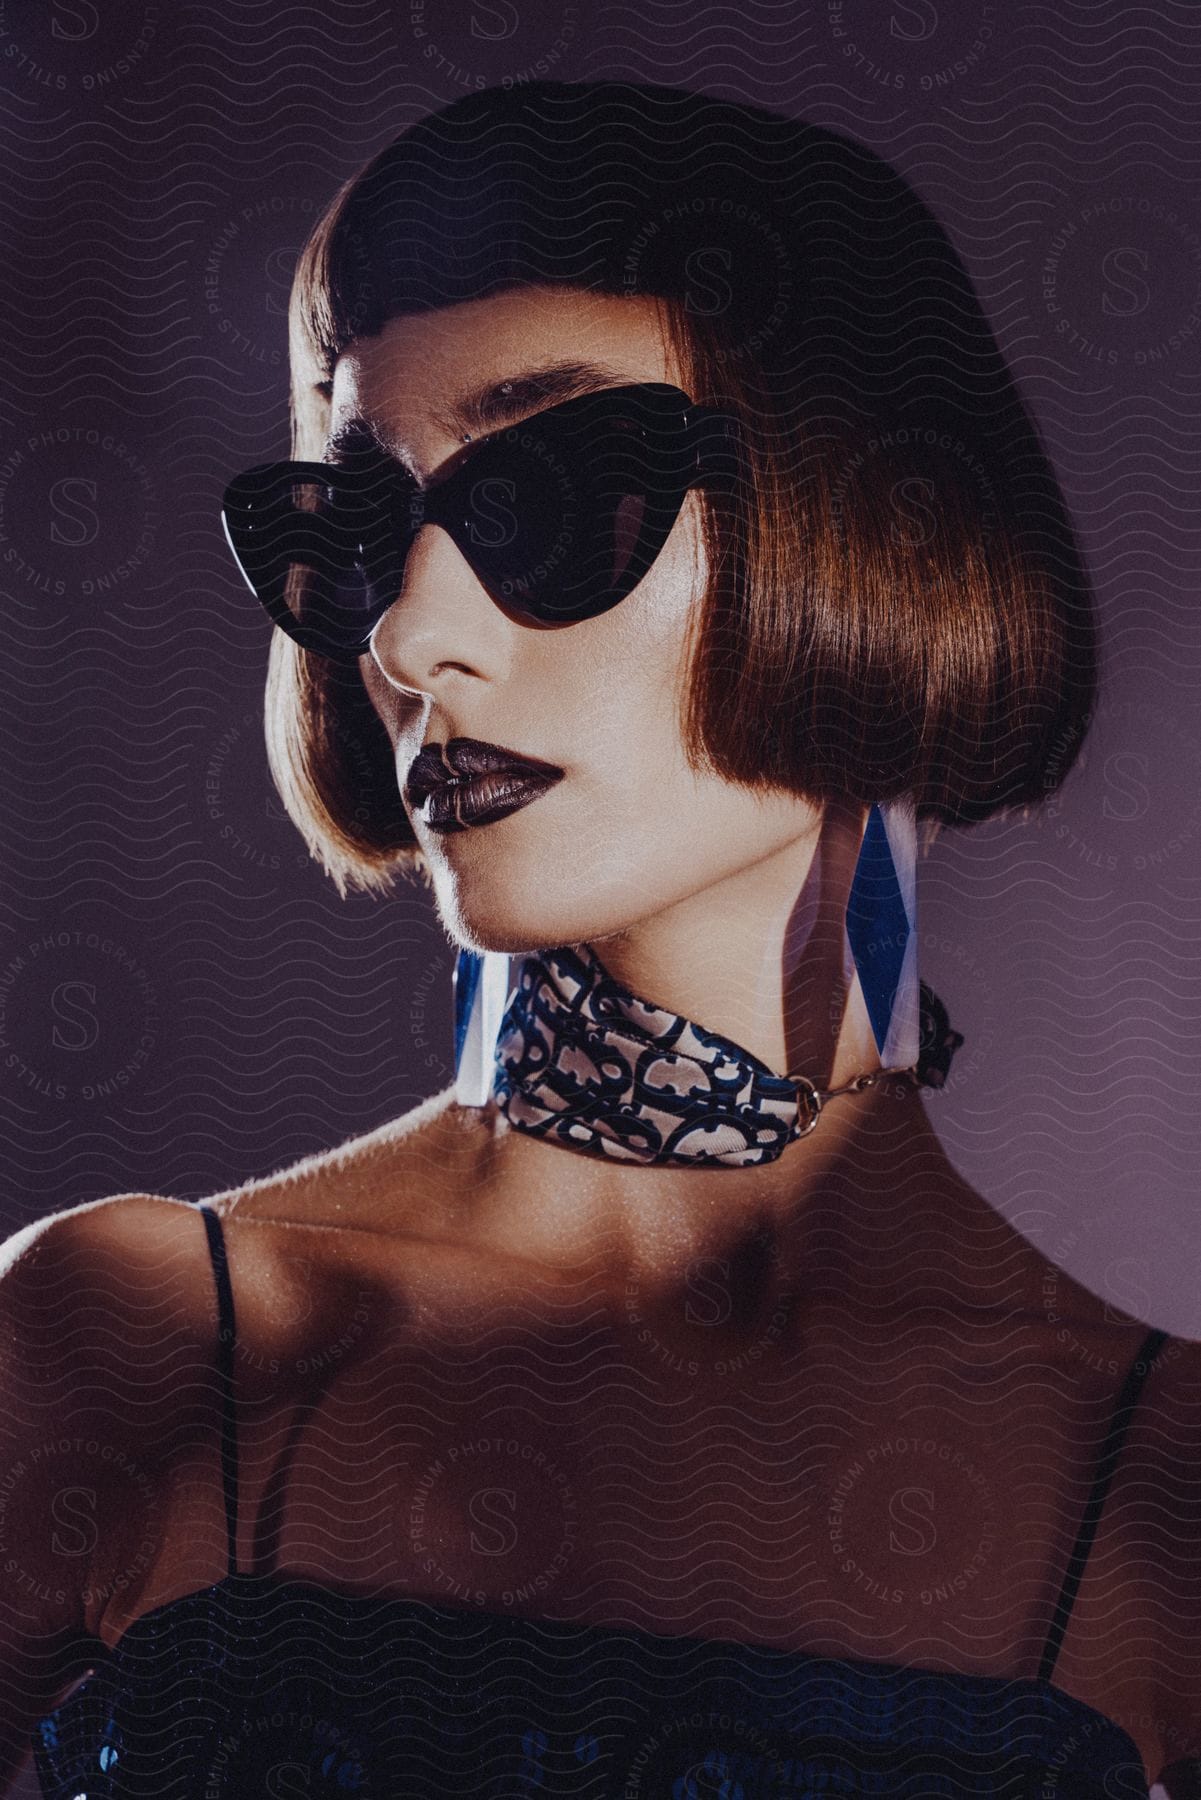 Stock photo of a woman wearing oversized sunglasses, a patterned neck scarf, and dark lipstick, with a sharp bob haircut.